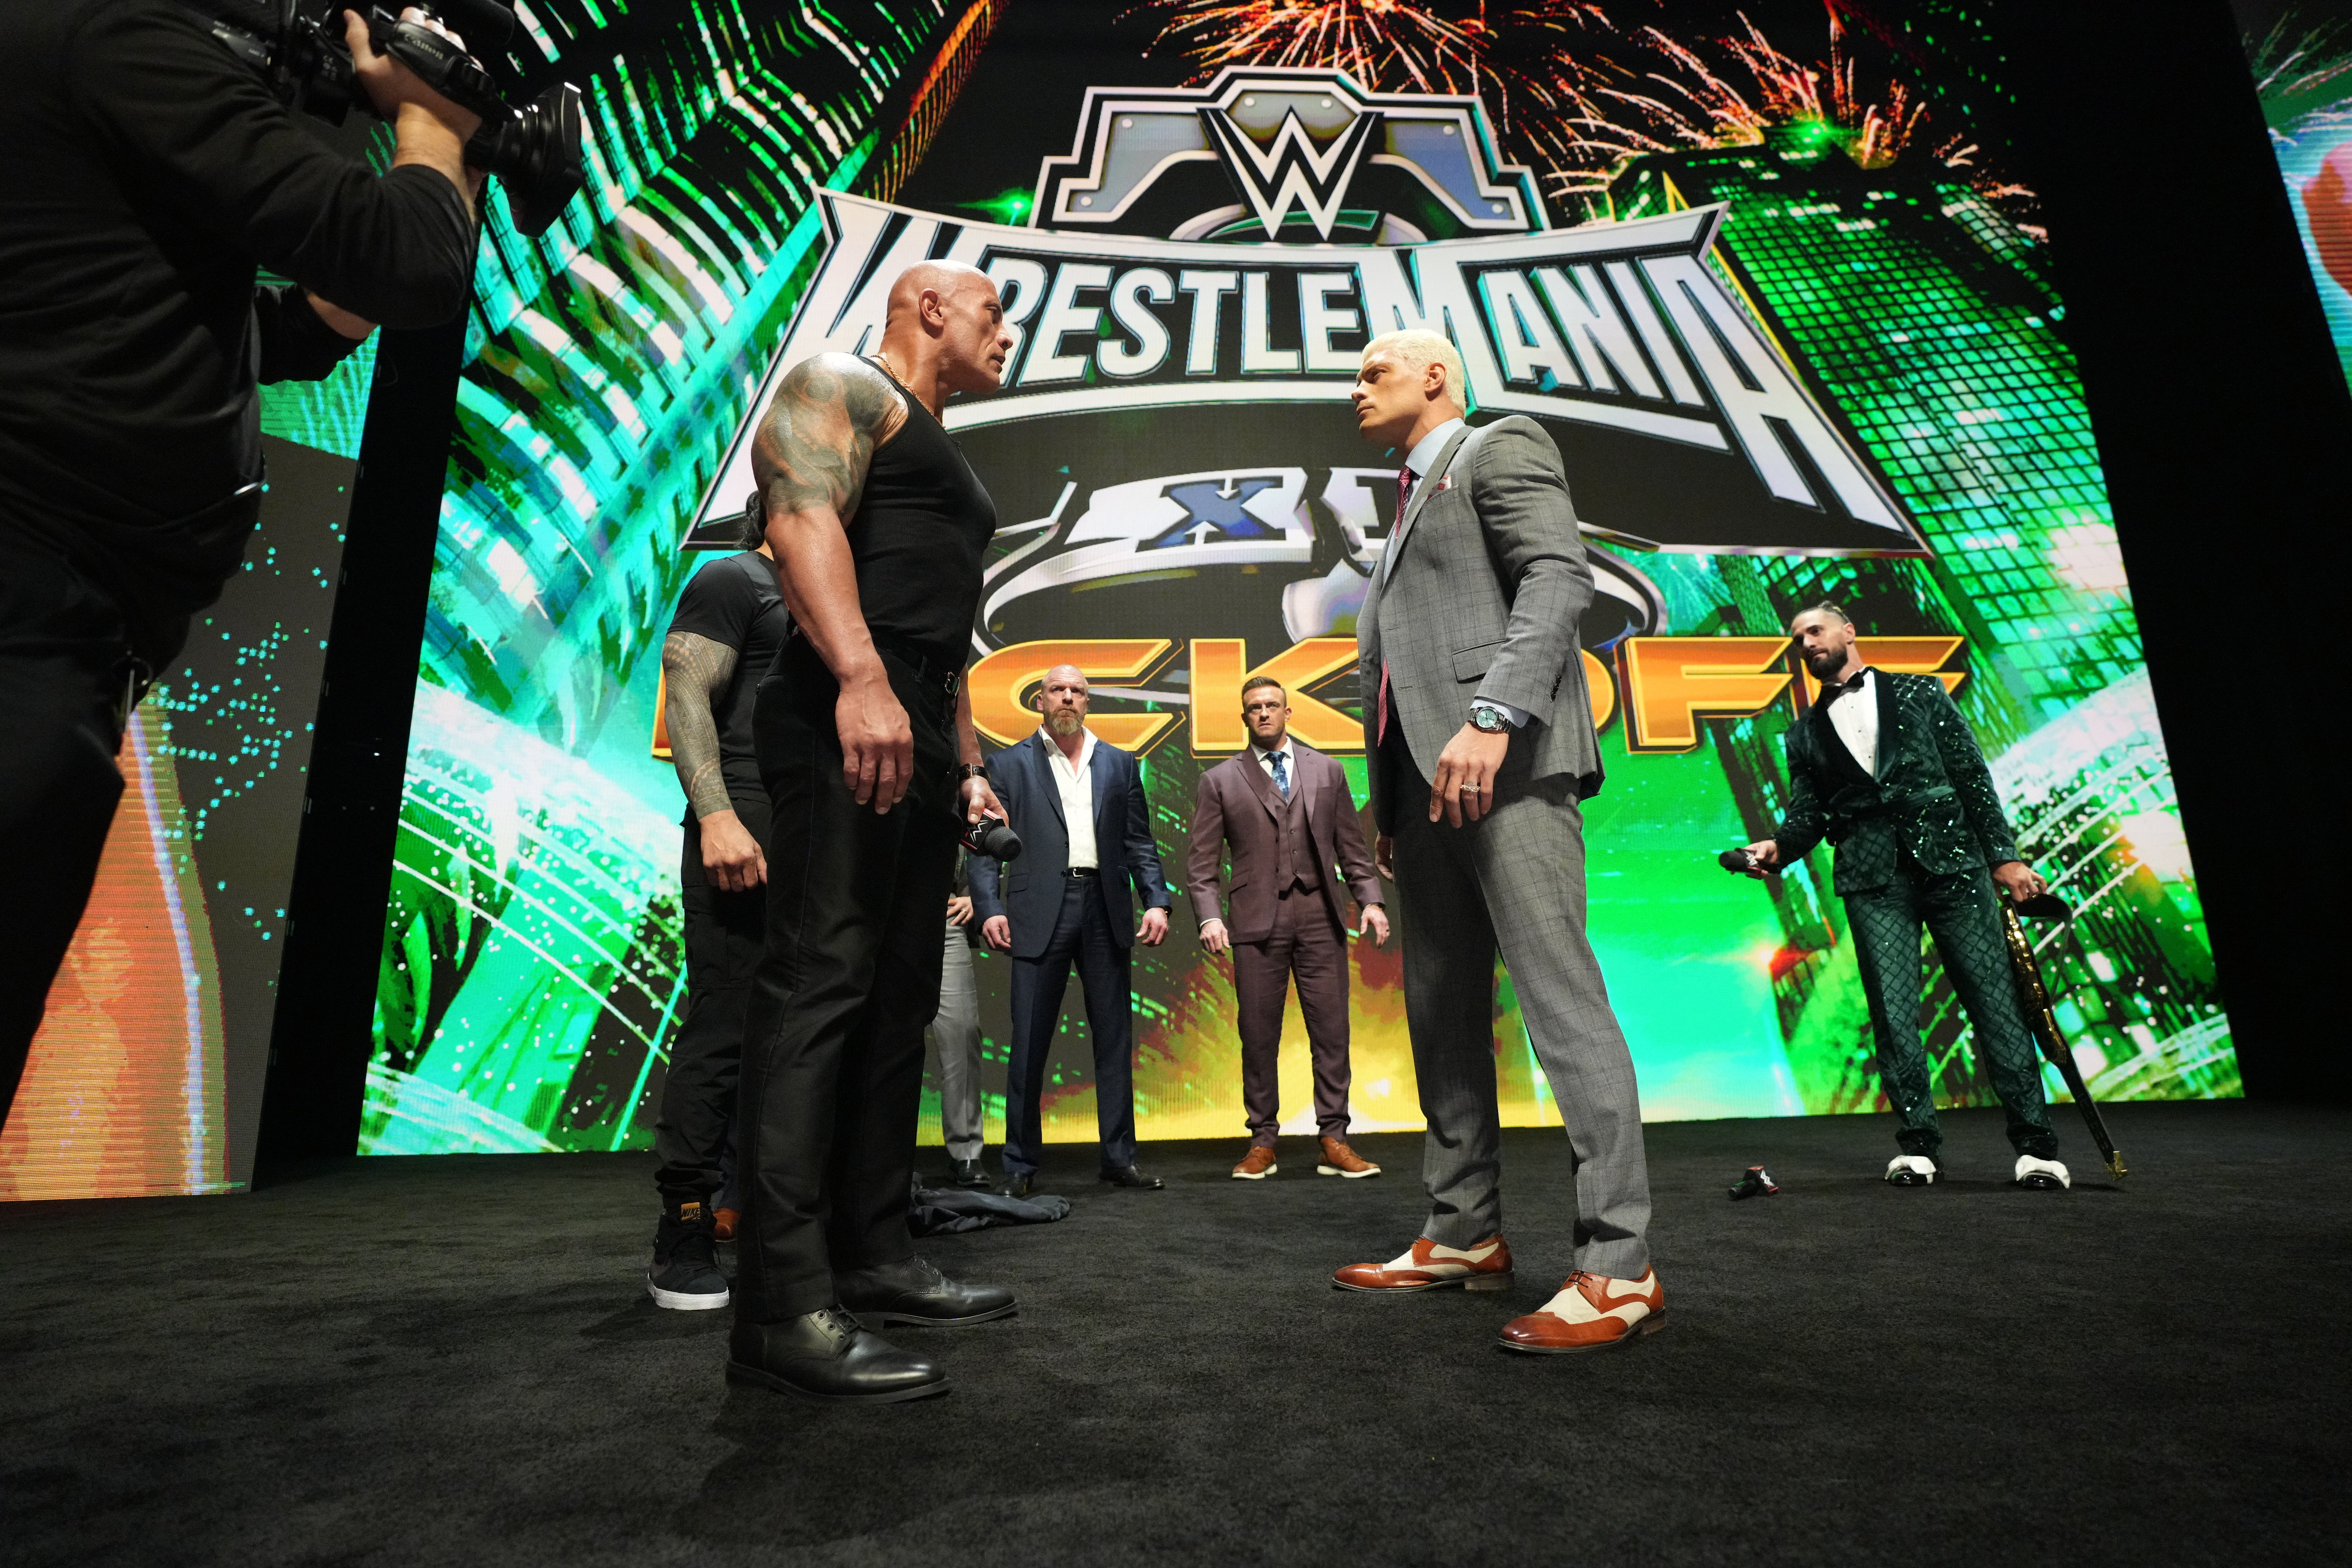 The Rock and Cody Rhodes will meet in a tag-team match, partnering Roman Reigns and Seth Rollins respectively